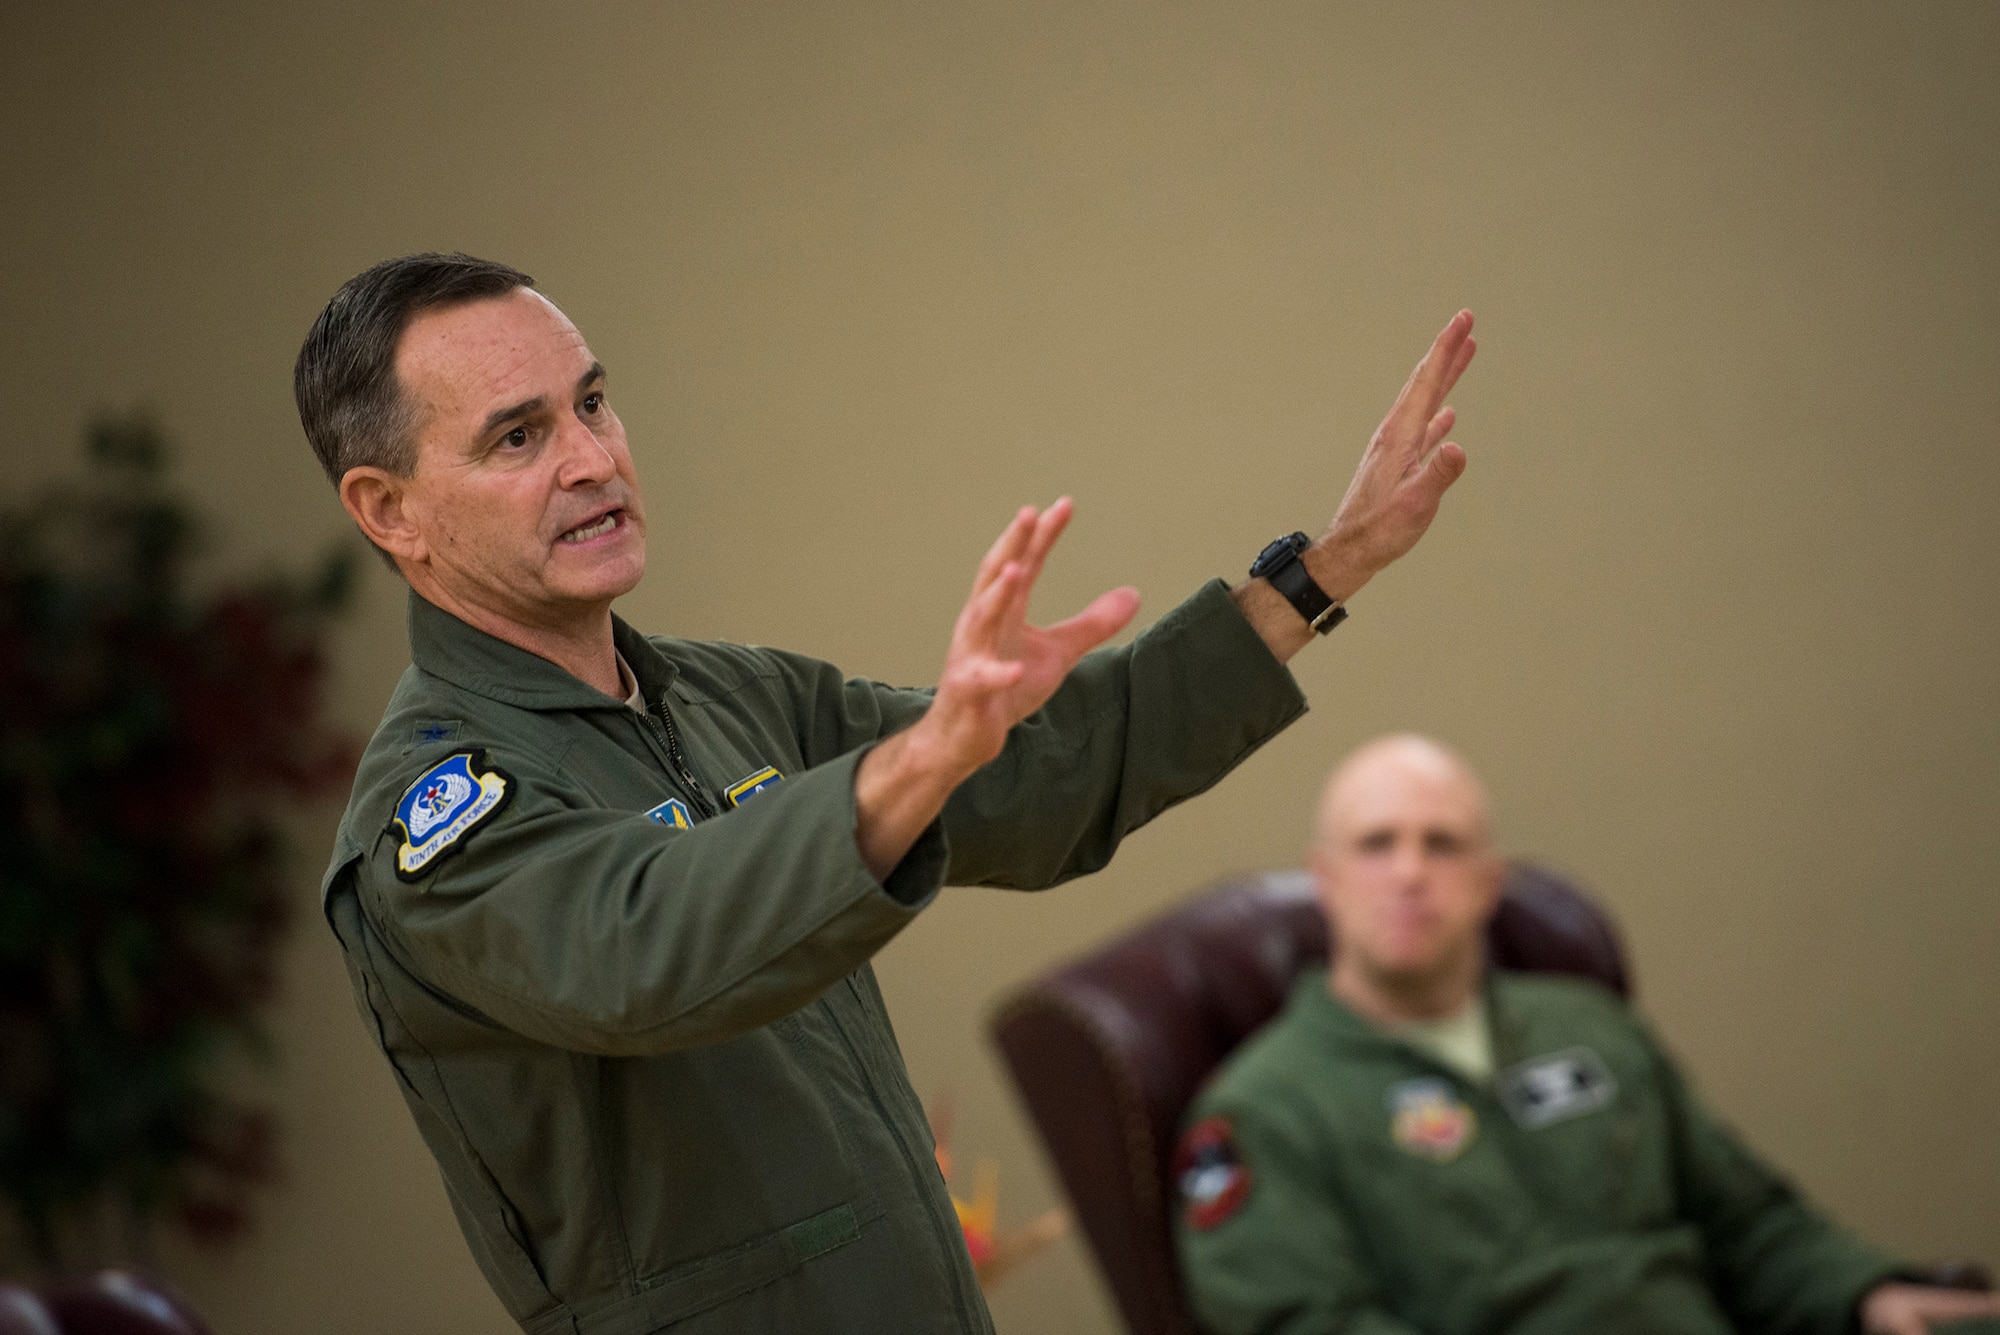 U.S. Air Force Maj. Gen. H.D. Polumbo Jr., Ninth Air Force commander, recounts the actions of Maj. Jeremiah Parvin, seated, 75th Fighter Squadron A-10C Thunderbolt II pilot, during a Distinguished Flying Cross presentation ceremony Jan. 29, 2015, at Moody Air Force Base, Ga. While flying in Afghanistan in 2008, Parvin received a call for help and flew 320 miles through adverse weather to the aid of a Marine Special Operations Team.  (U.S. Air Force photo by Senior Airman Ryan Callaghan/Released)